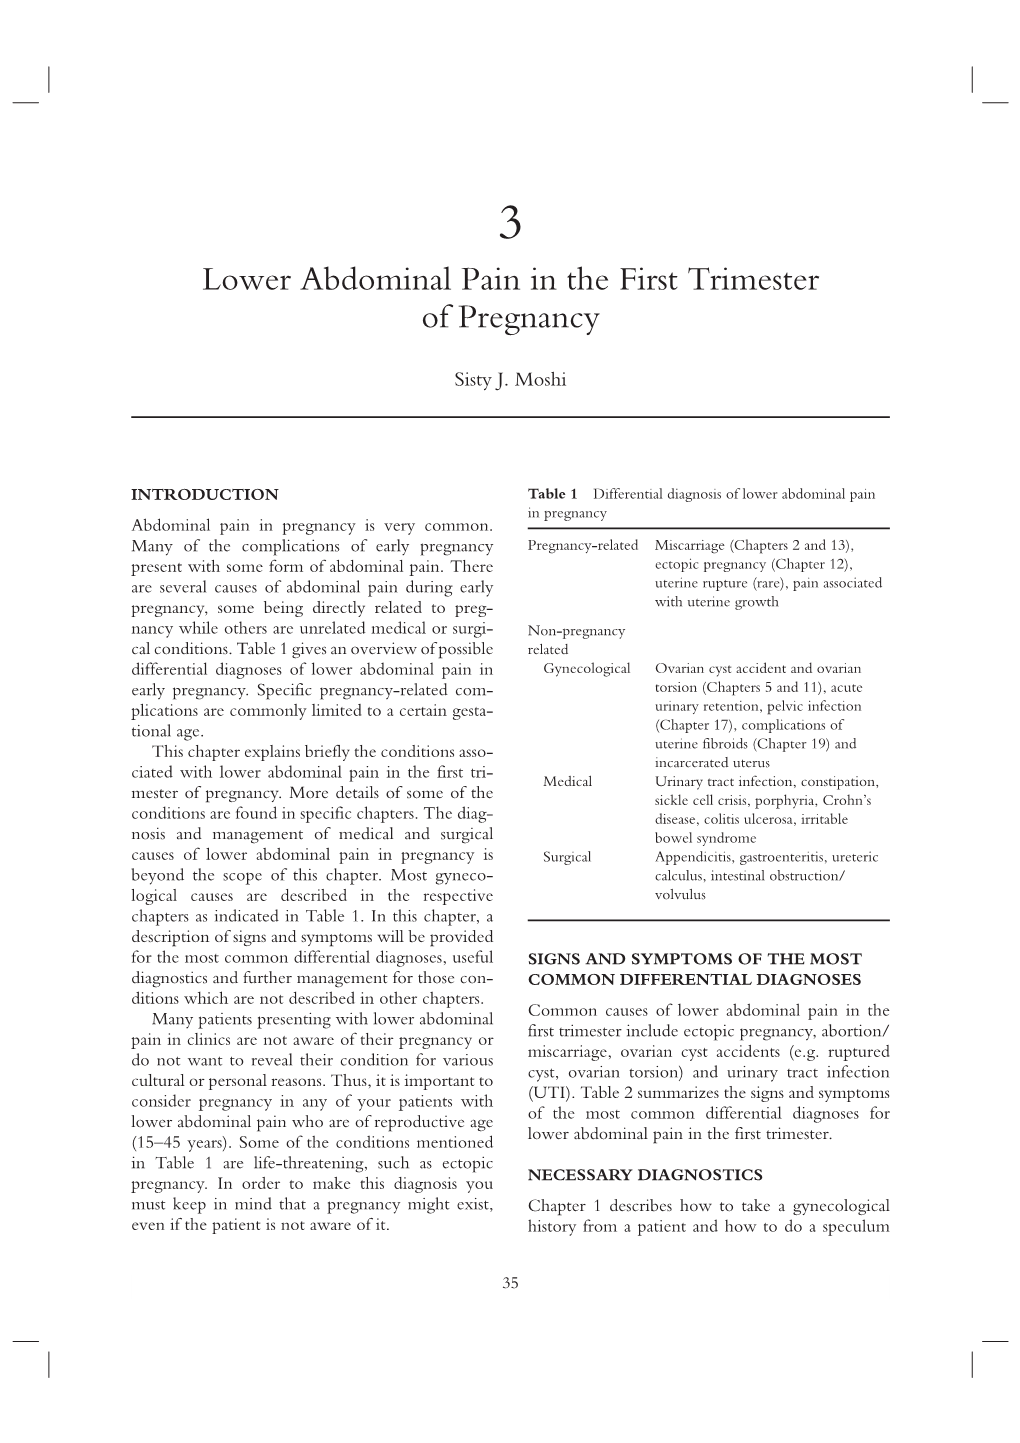 Lower Abdominal Pain in the First Trimester of Pregnancy